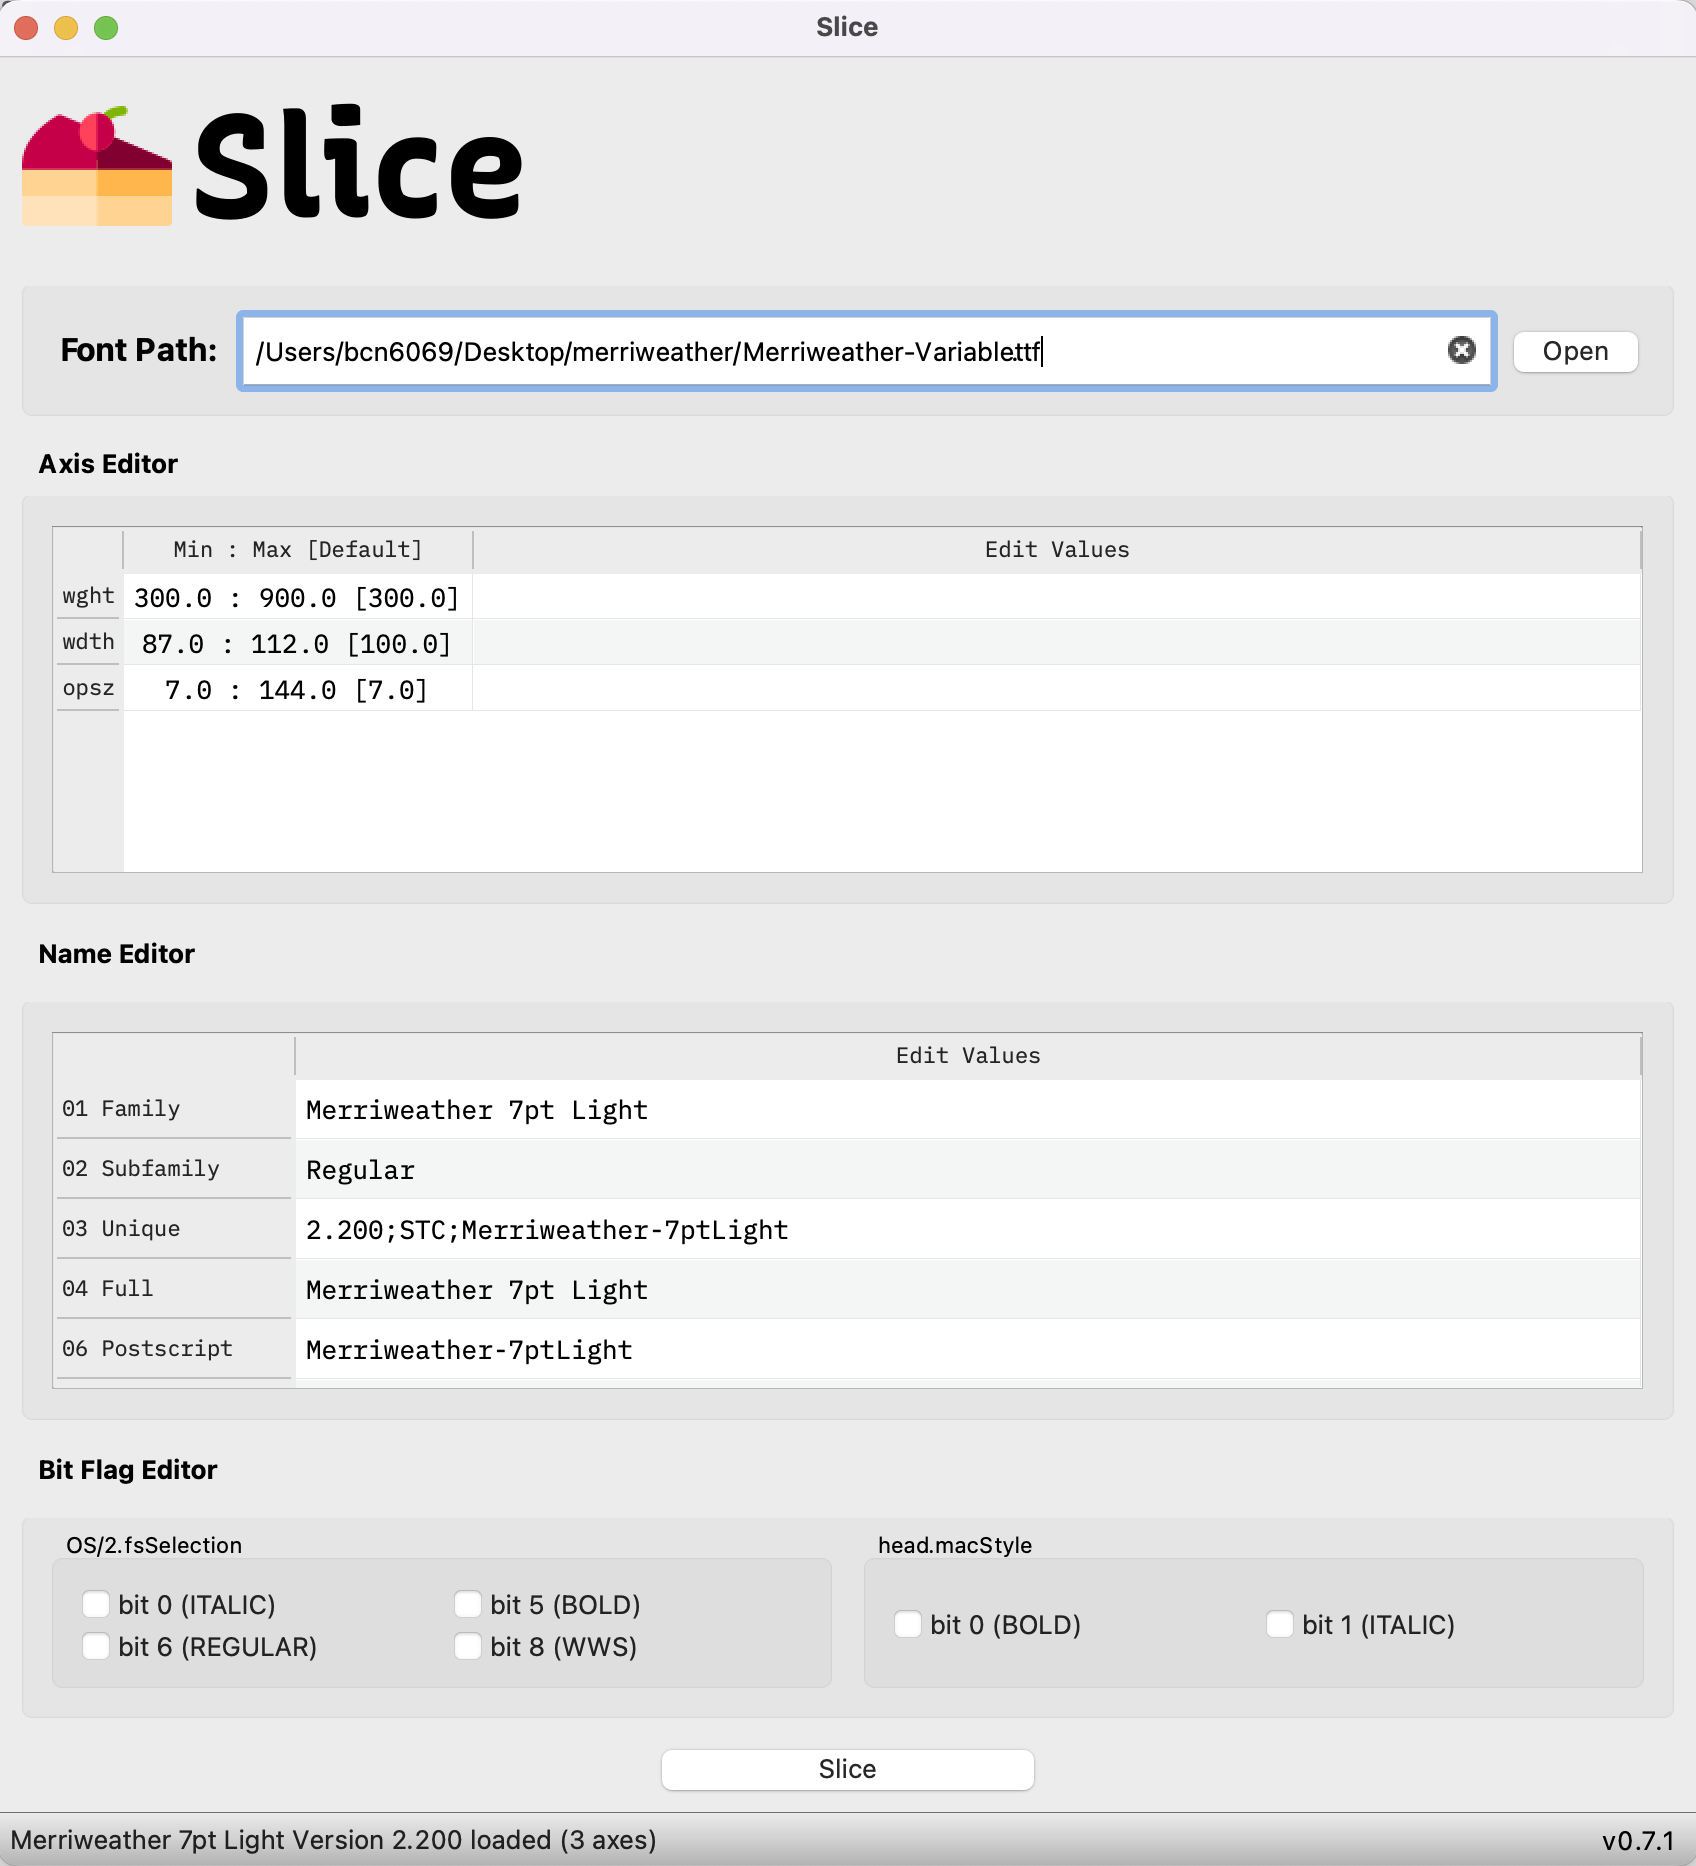 A screenshot of the Slice desktop application with the source font file loaded and it's meta data displayed. wght, wdth and opsz axes are defined for the font.